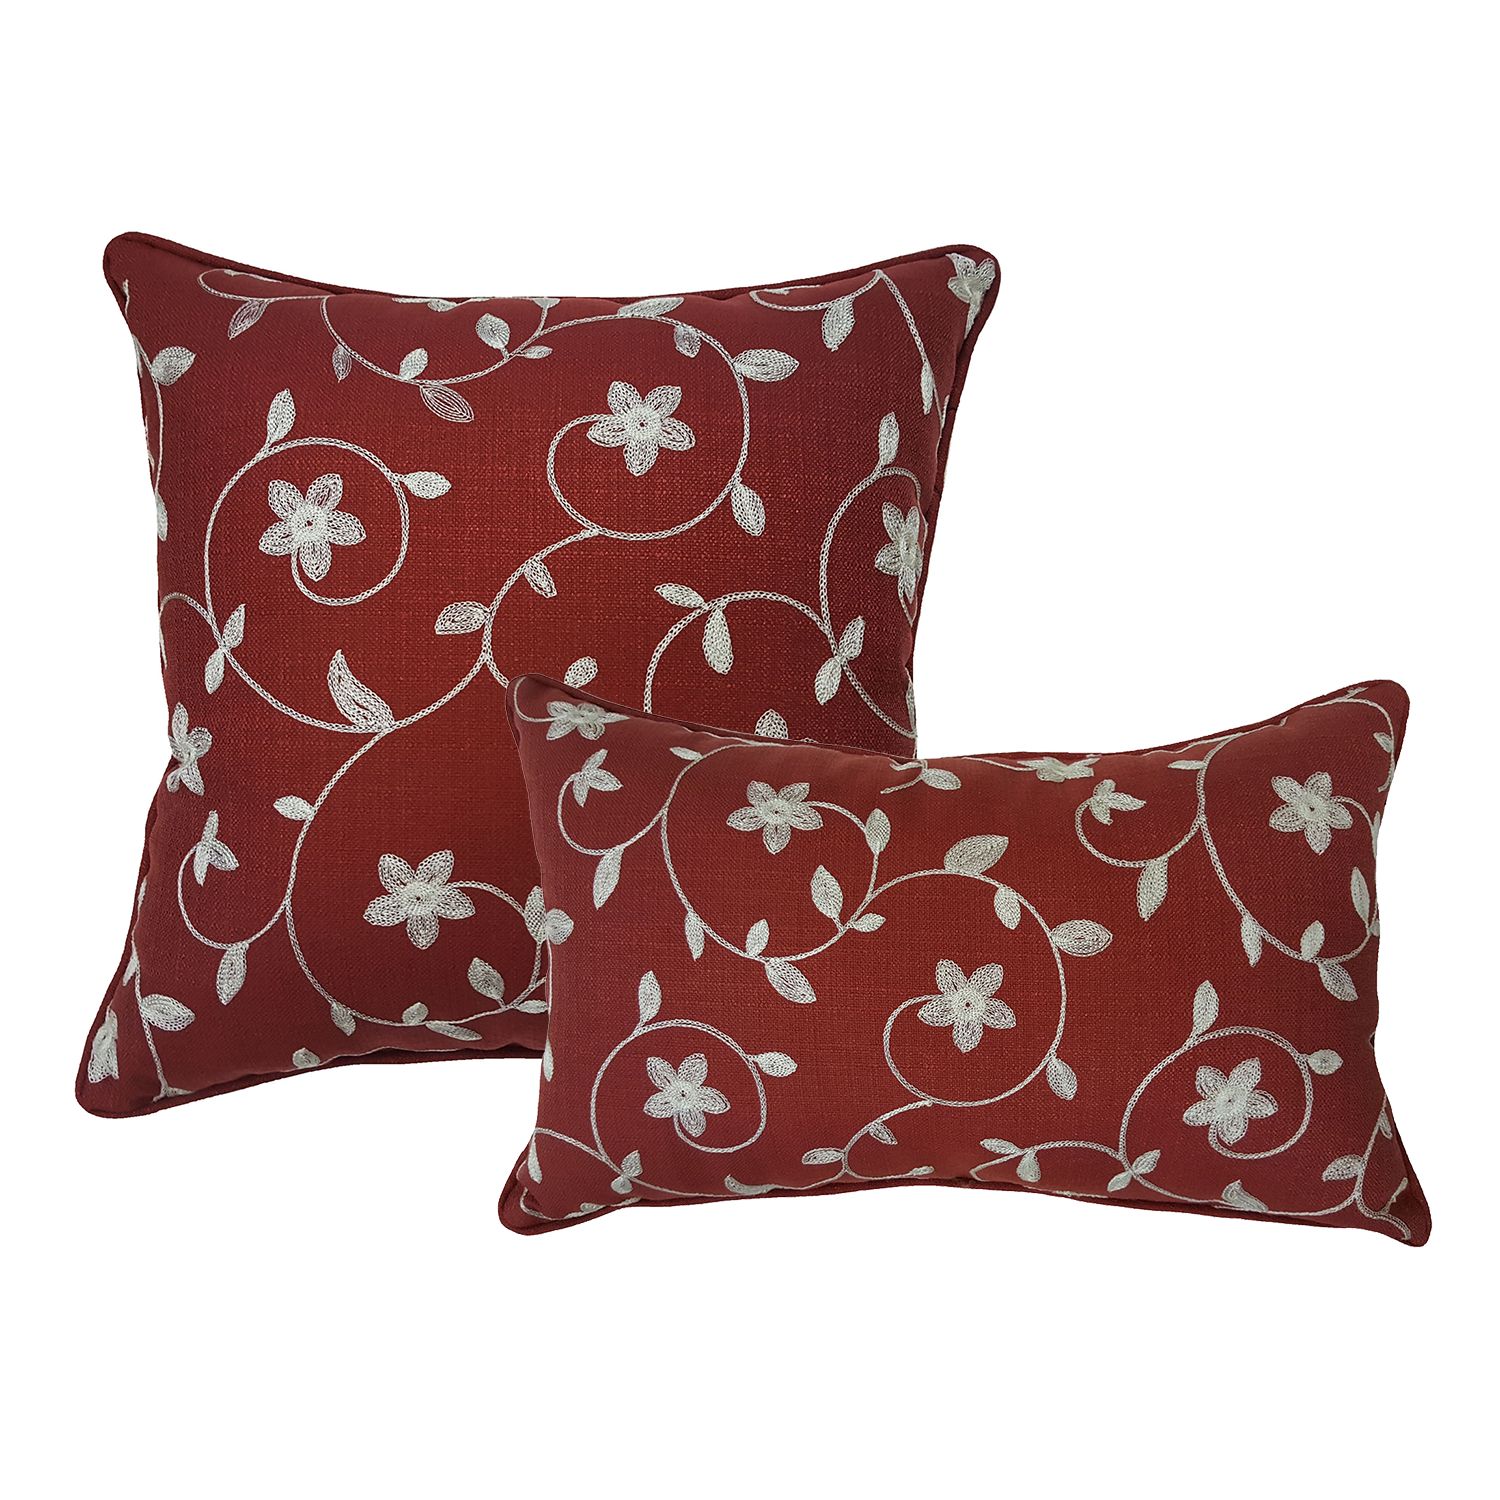 Image for HFI La Mayflower Throw Pillow Collection at Kohl's.